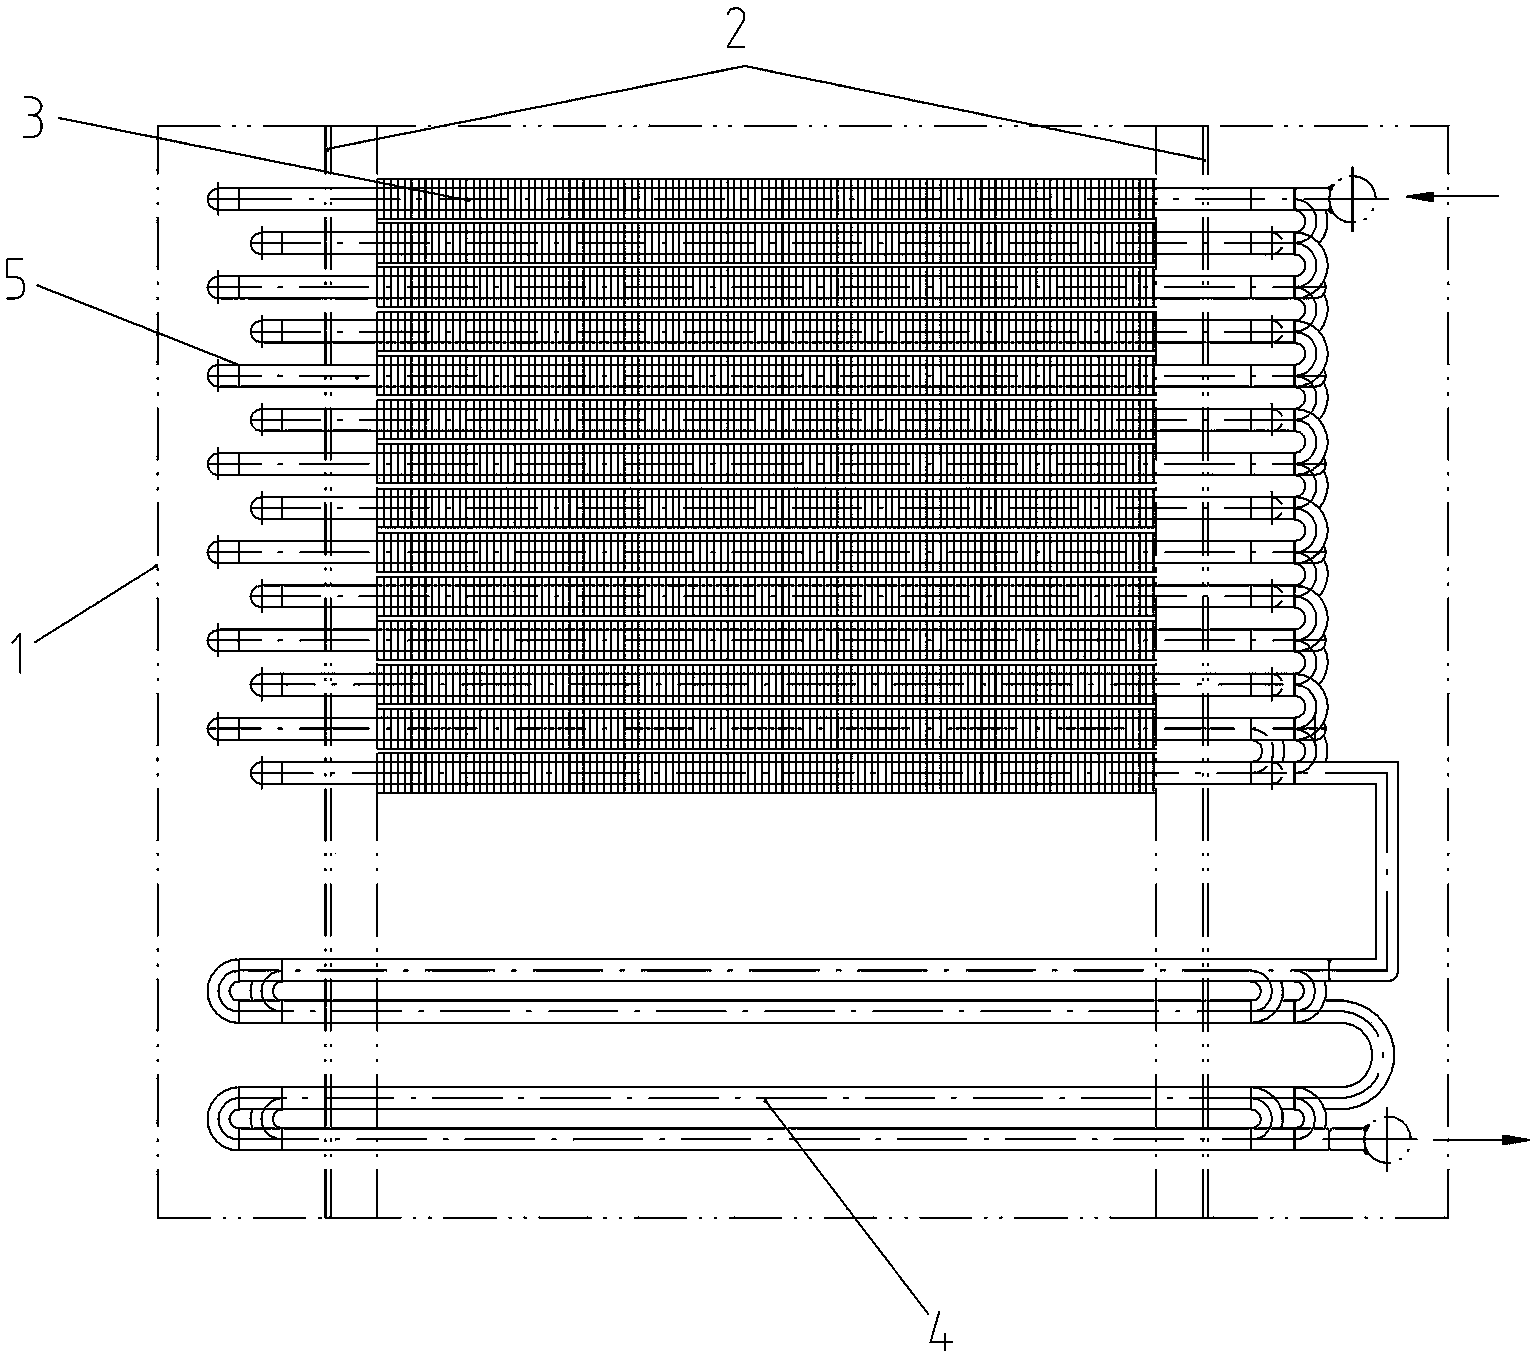 Coal economizer with H-type ribbed tubes